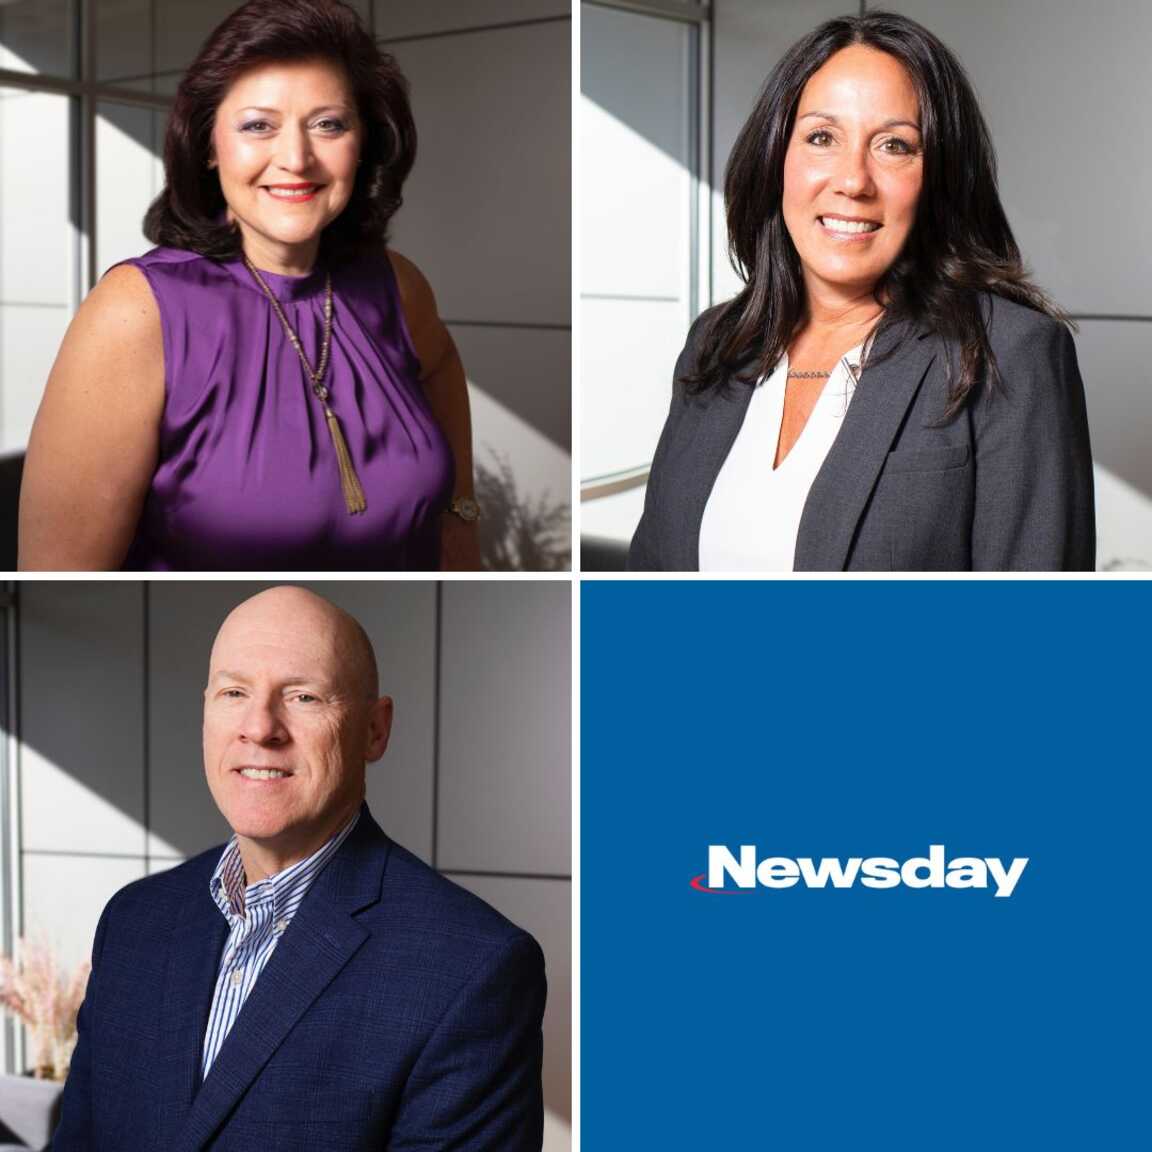 Aurora’s Newest Hires Featured in Newsday